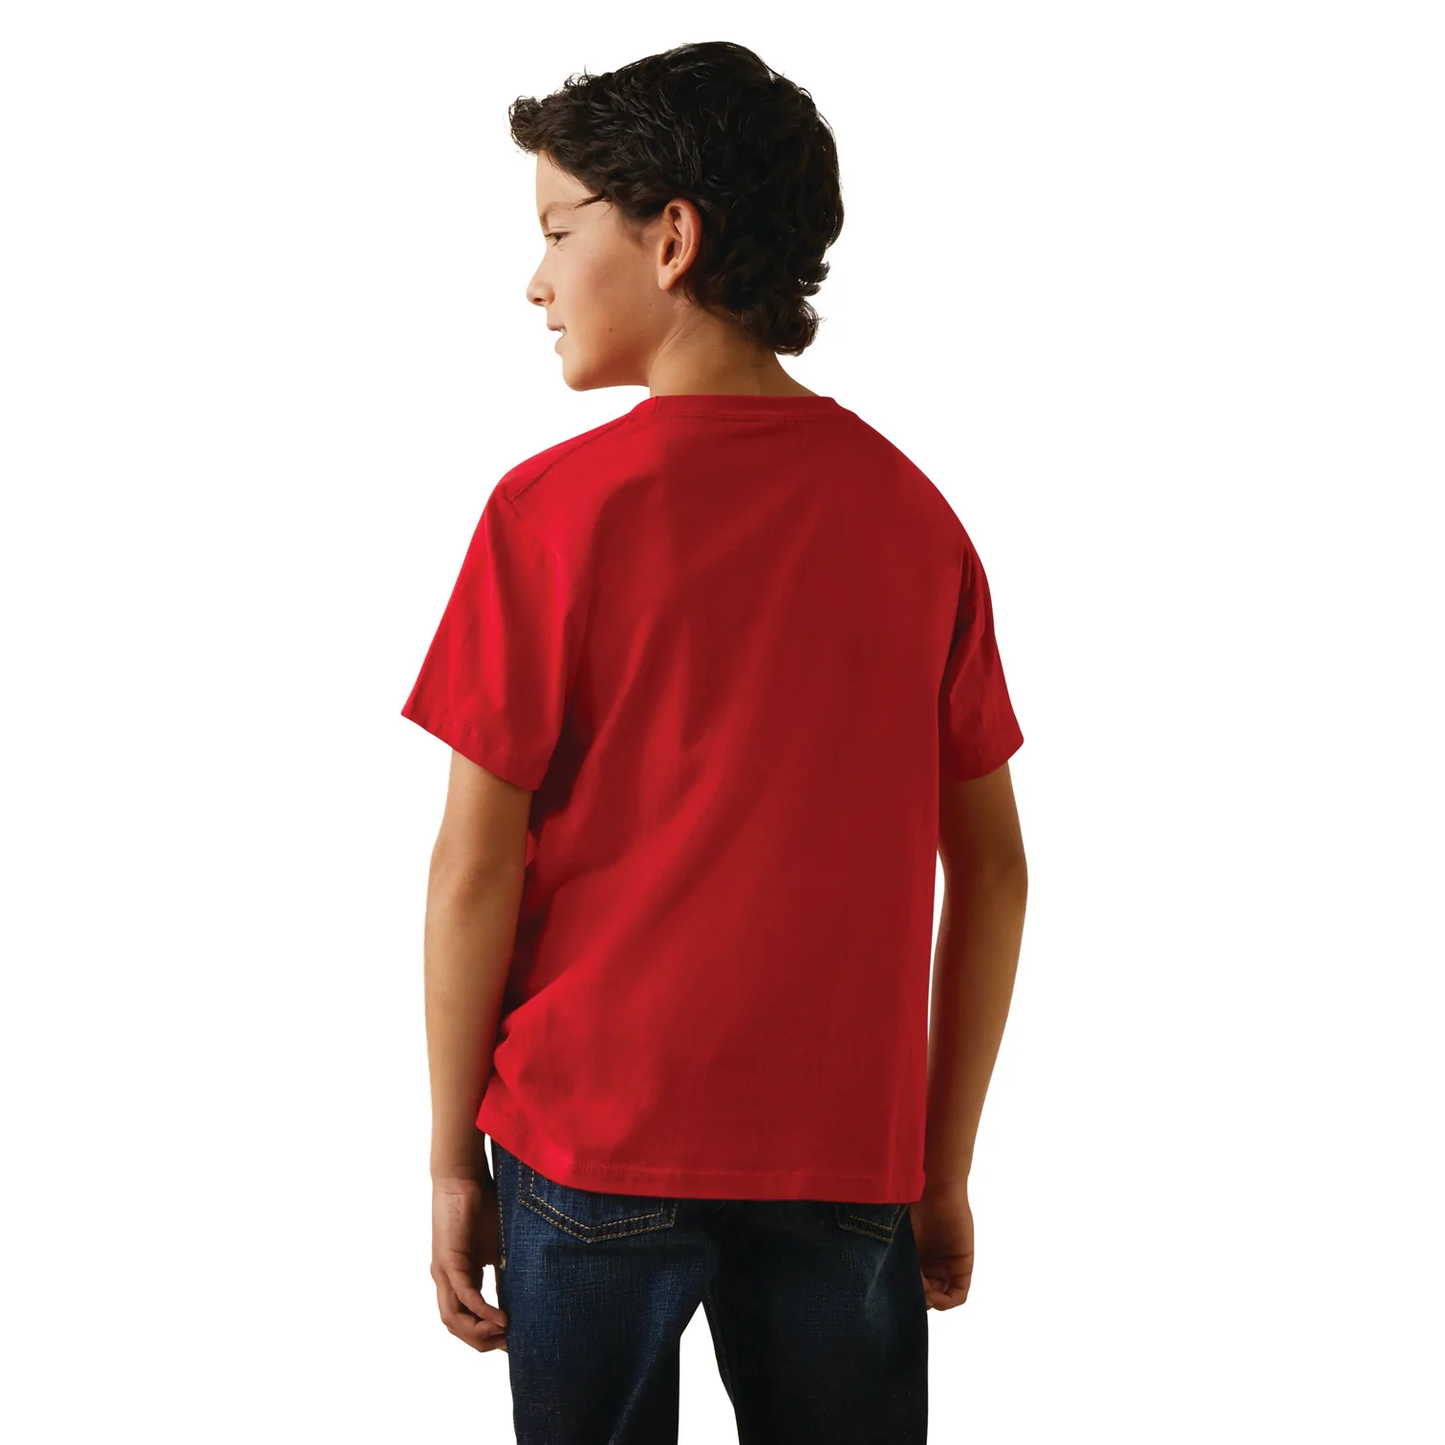 Ariat® Youth Boy's Viva Mexico Independent SMU Red T-Shirt 10043065